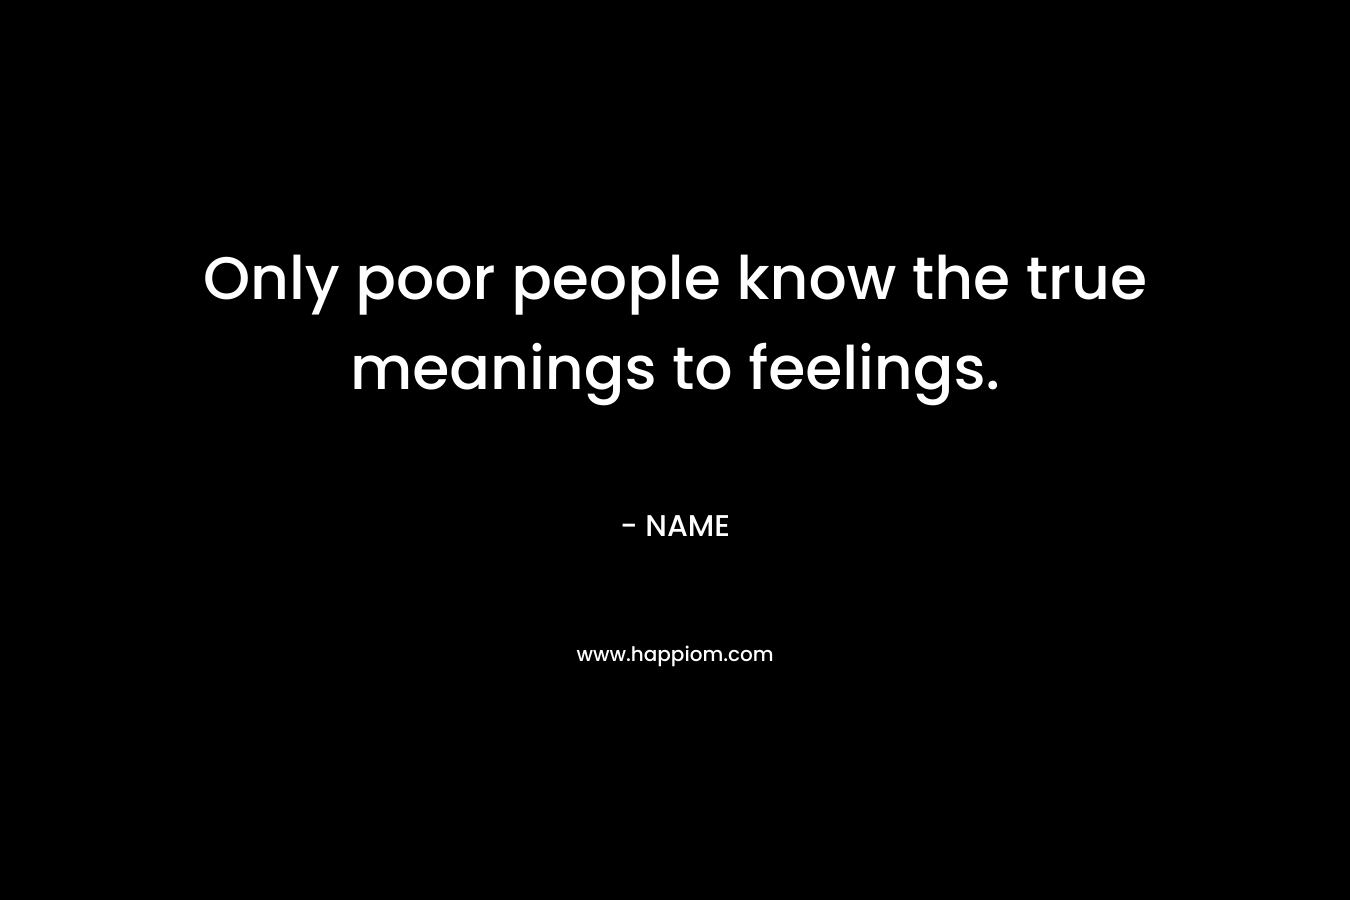 Only poor people know the true meanings to feelings.